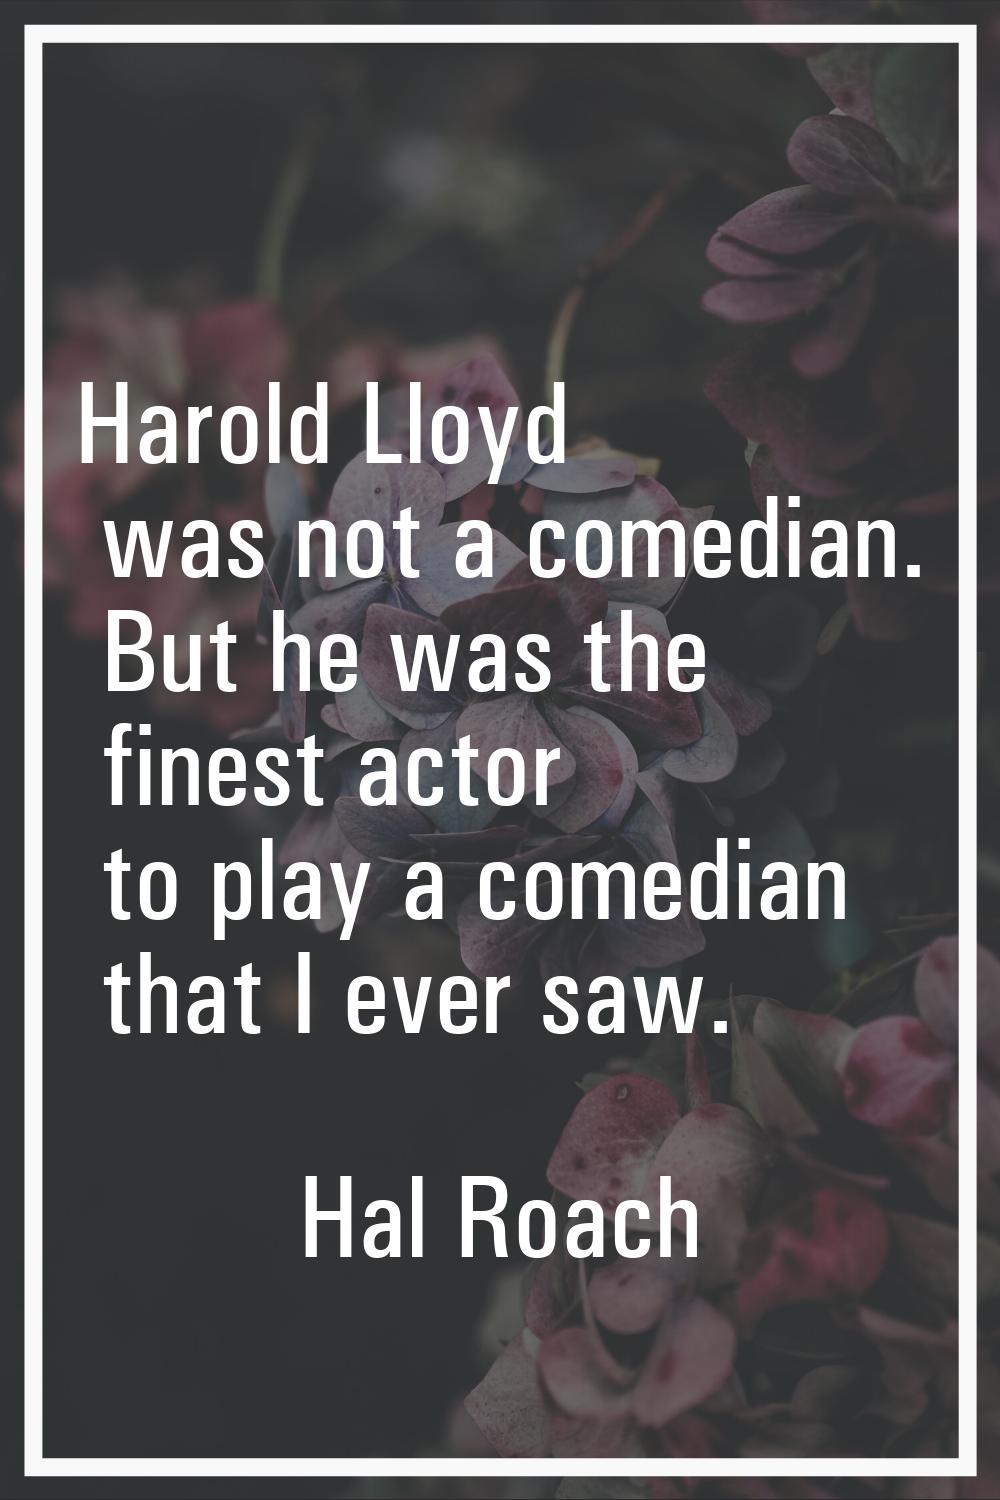 Harold Lloyd was not a comedian. But he was the finest actor to play a comedian that I ever saw.